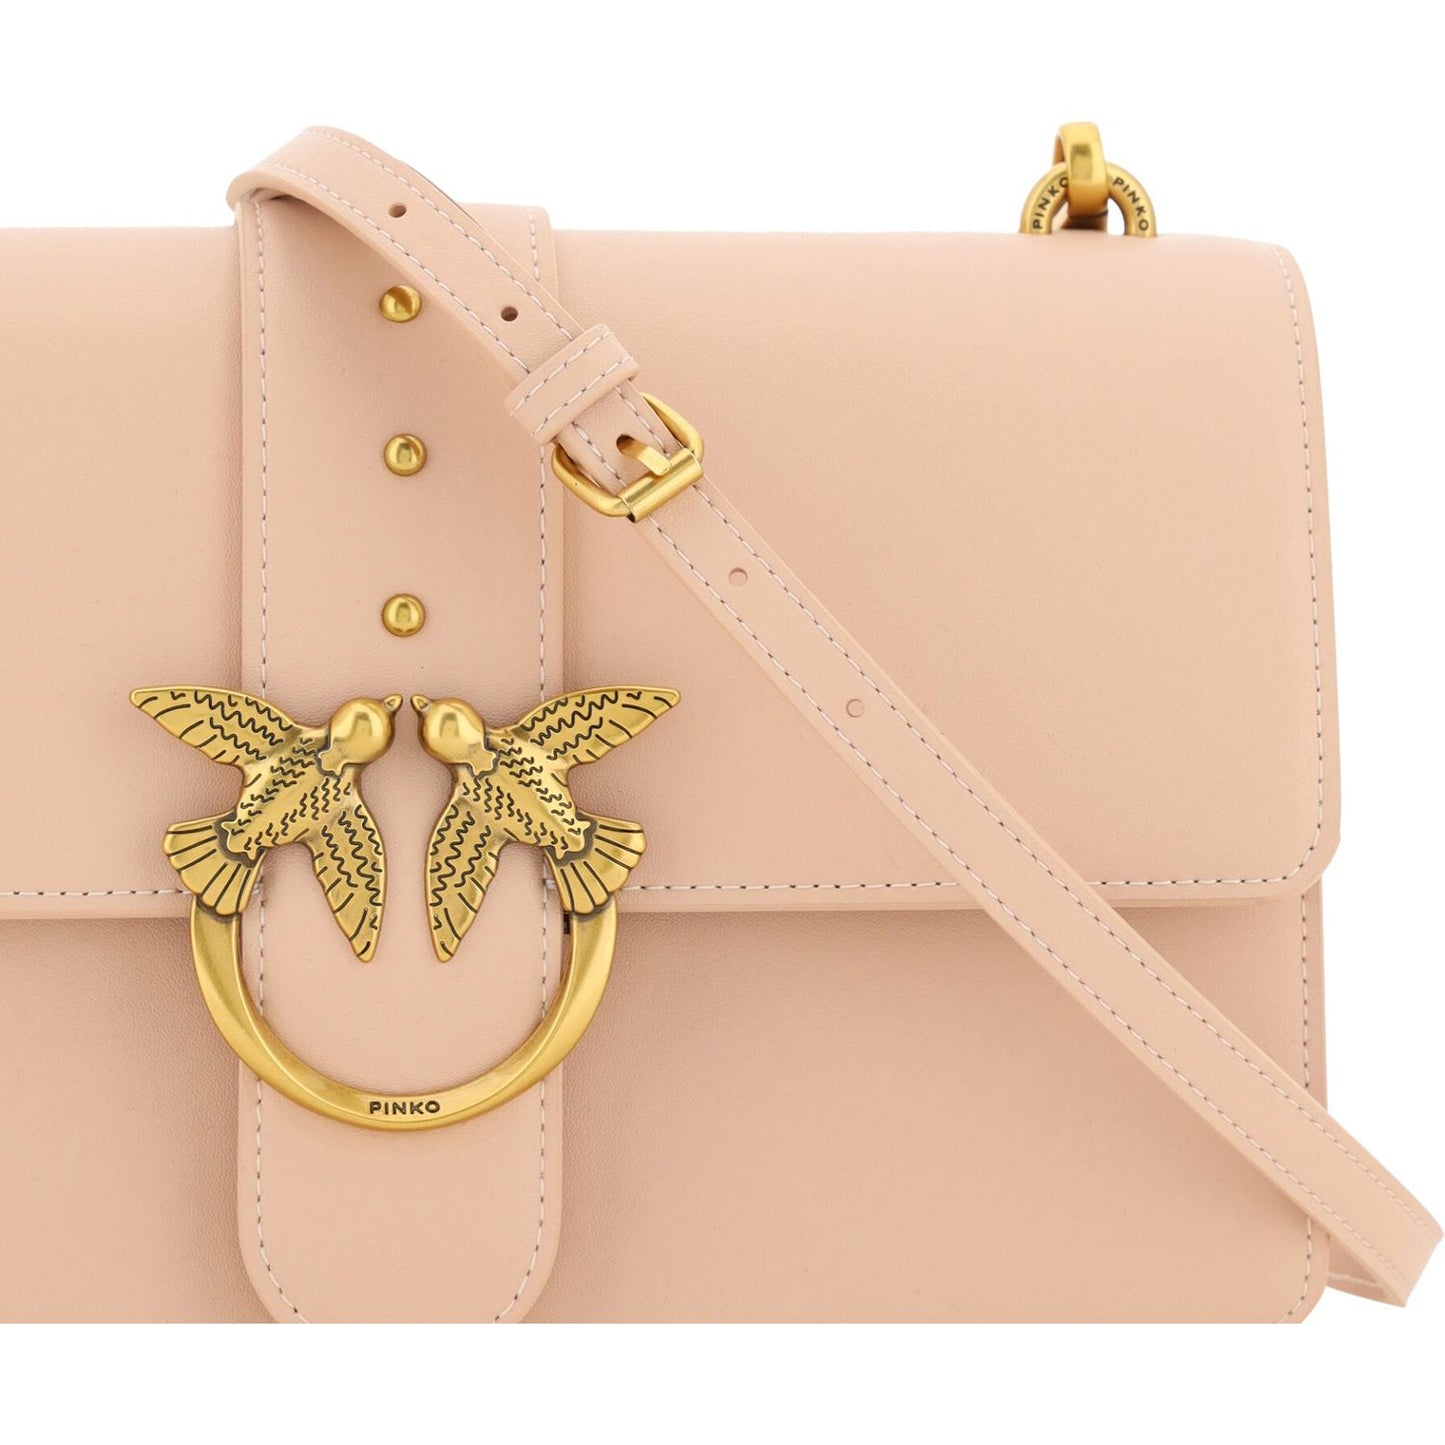 PINKO Chic Cipria Pink Classic Shoulder Bag pink-calf-leather-love-one-classic-shoulder-bag 51C2546B-462F-4A17-BBBE-0A238167C962-scaled-5c0e48ee-df9.jpg